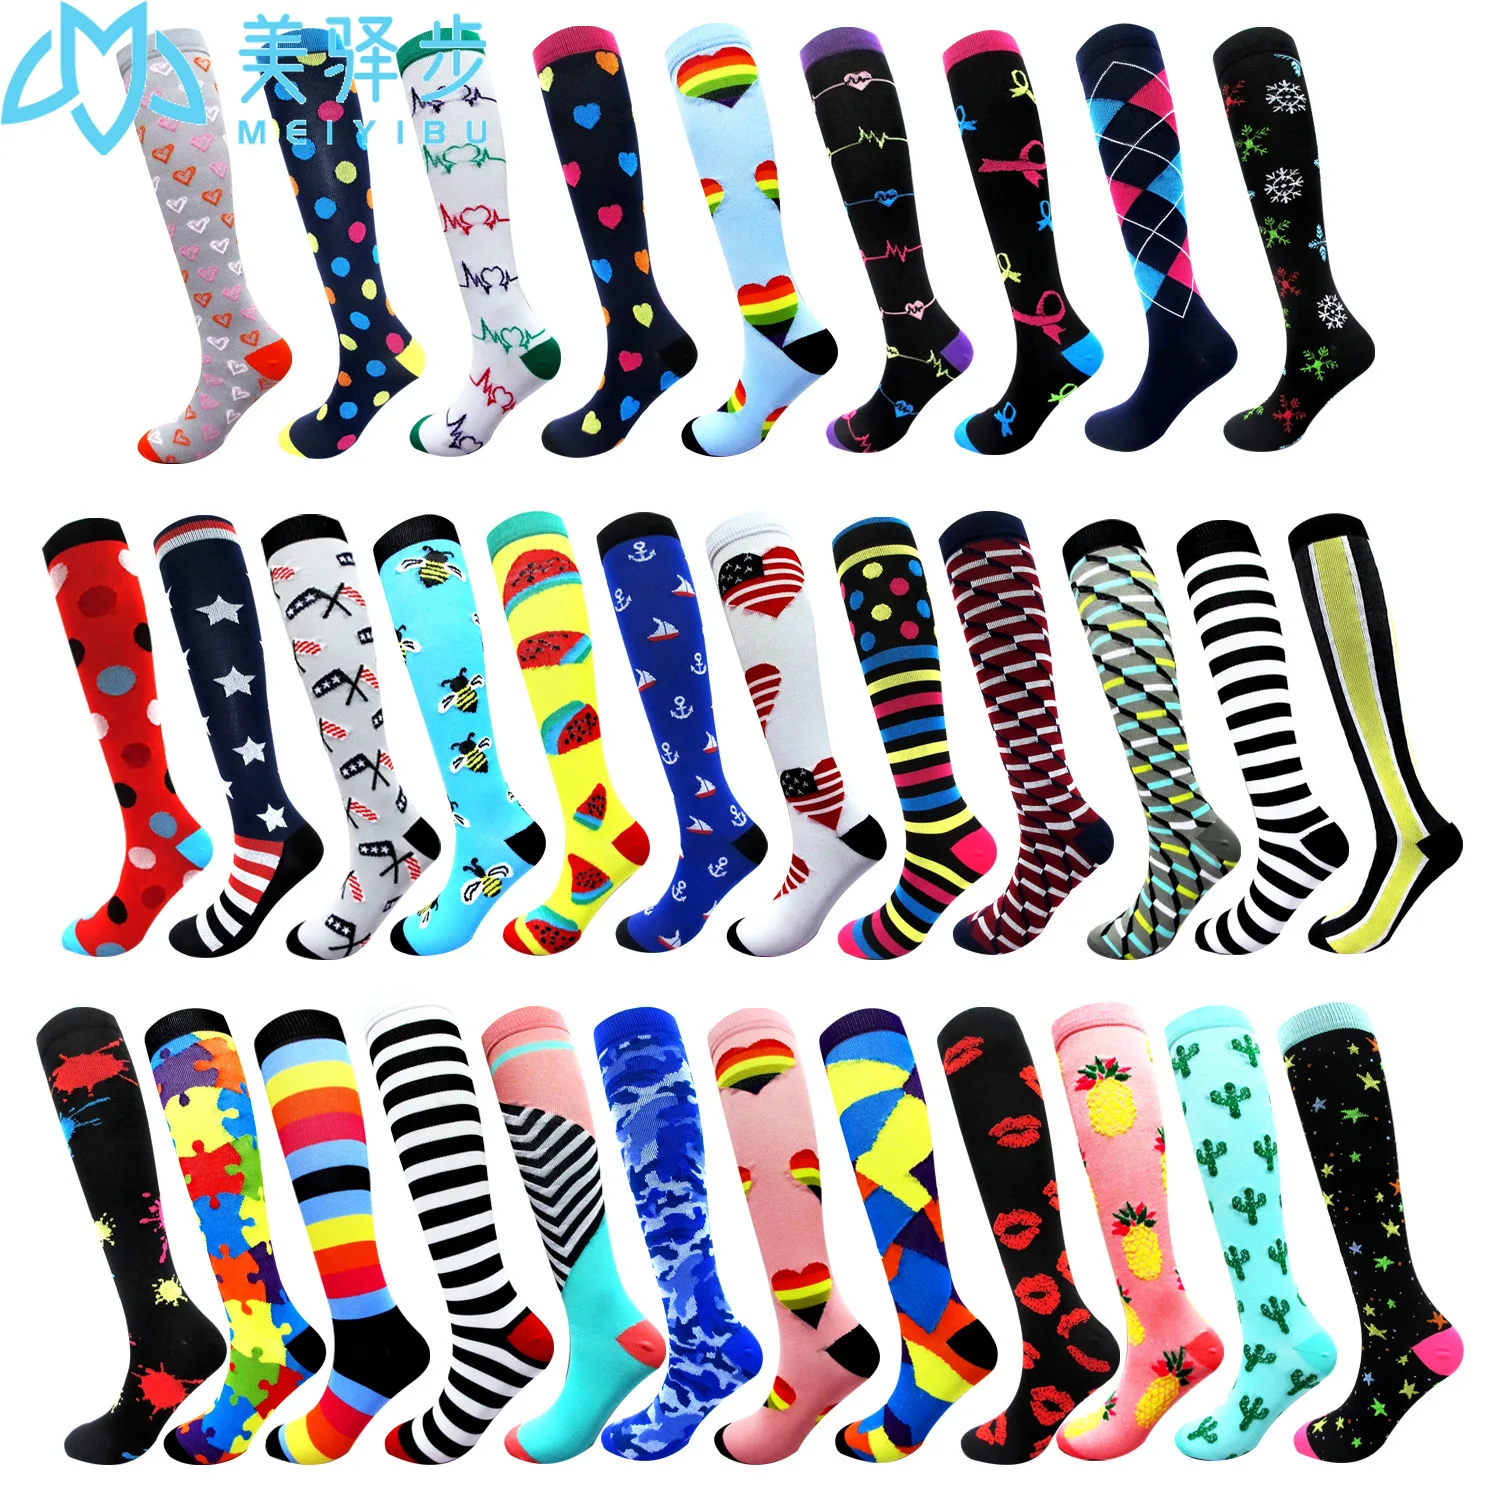 Unisex Elastic Outdoor Compression Magic Stockings Women Breathable Nylon Fitness Sport camping Soccer Stocking Protect Feet hiking socks women